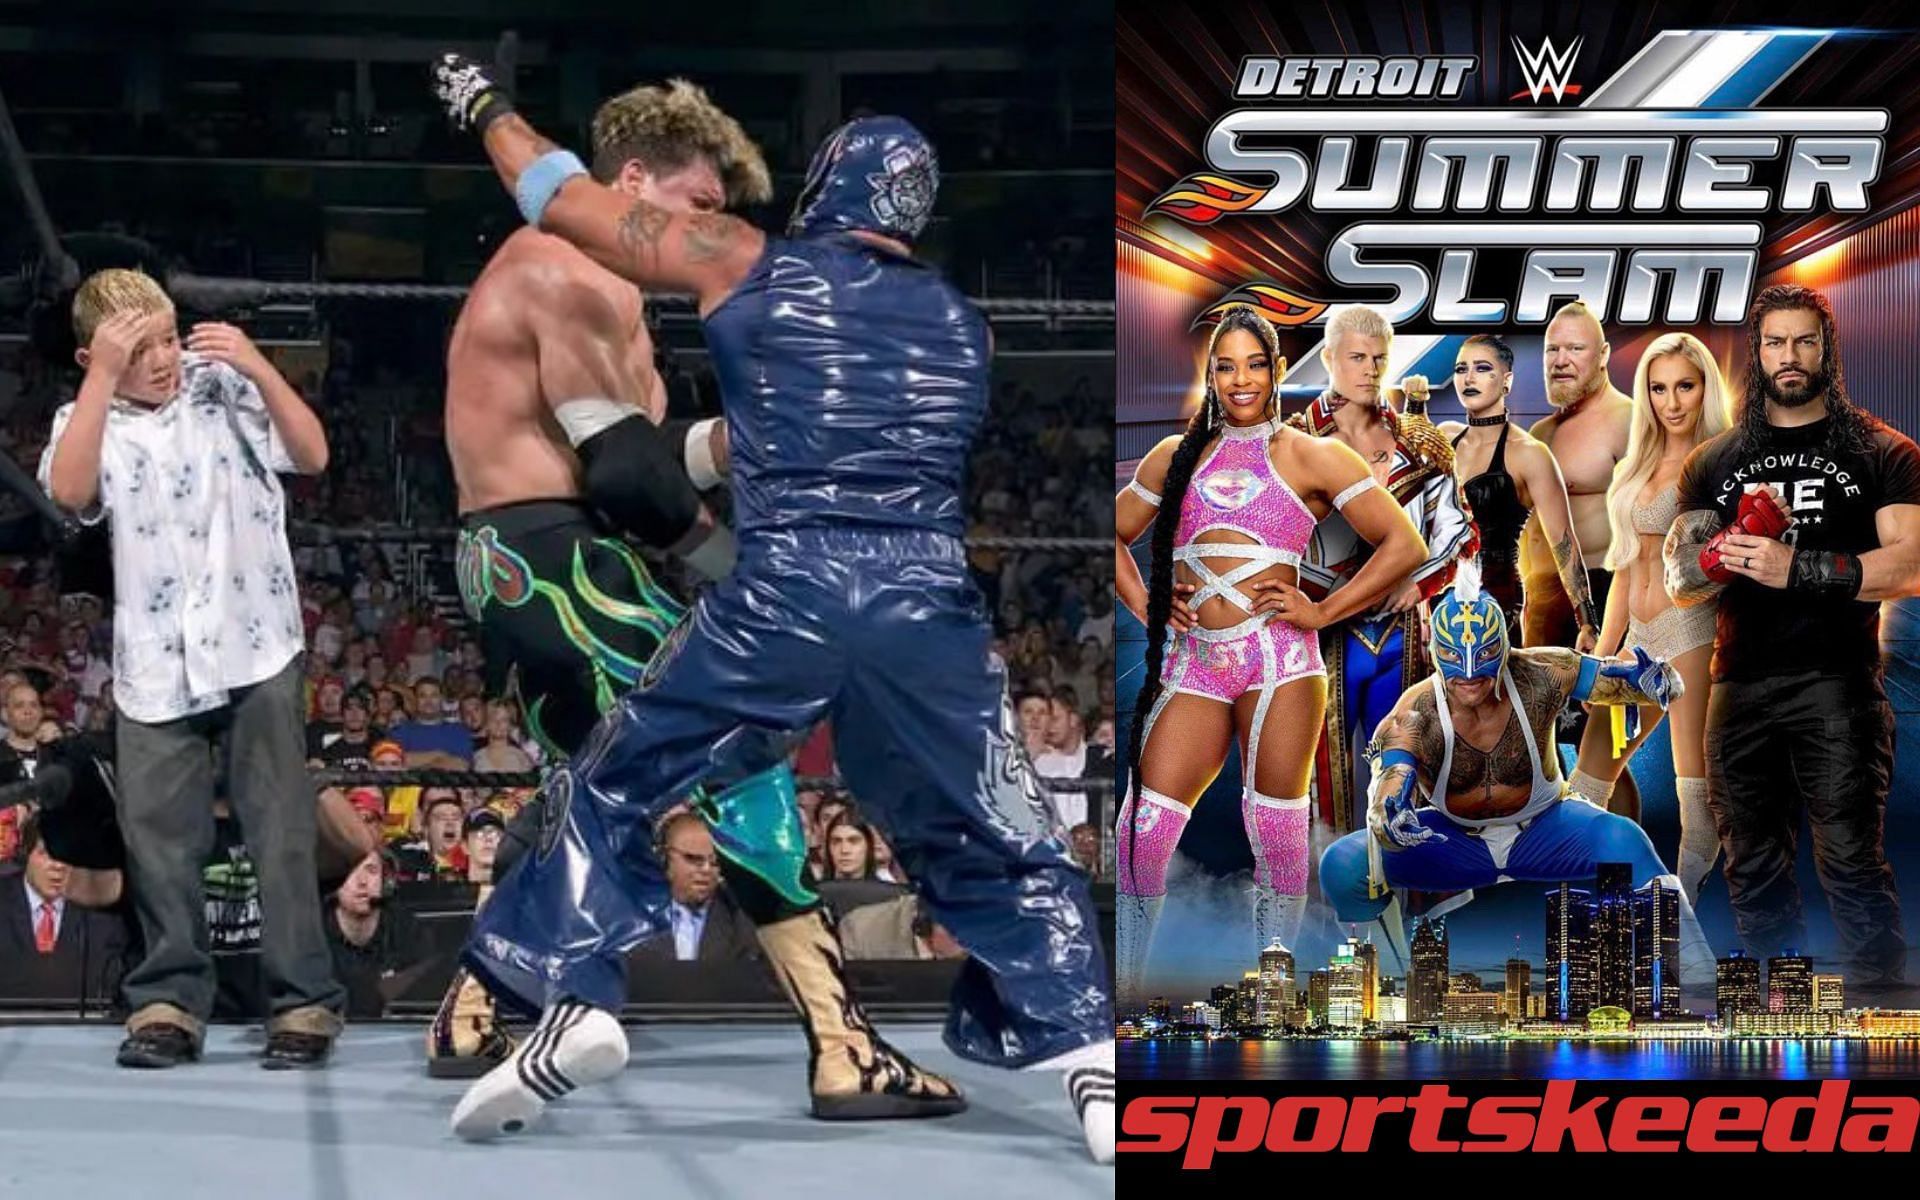 SummerSlam takes over Motor City USA this year!